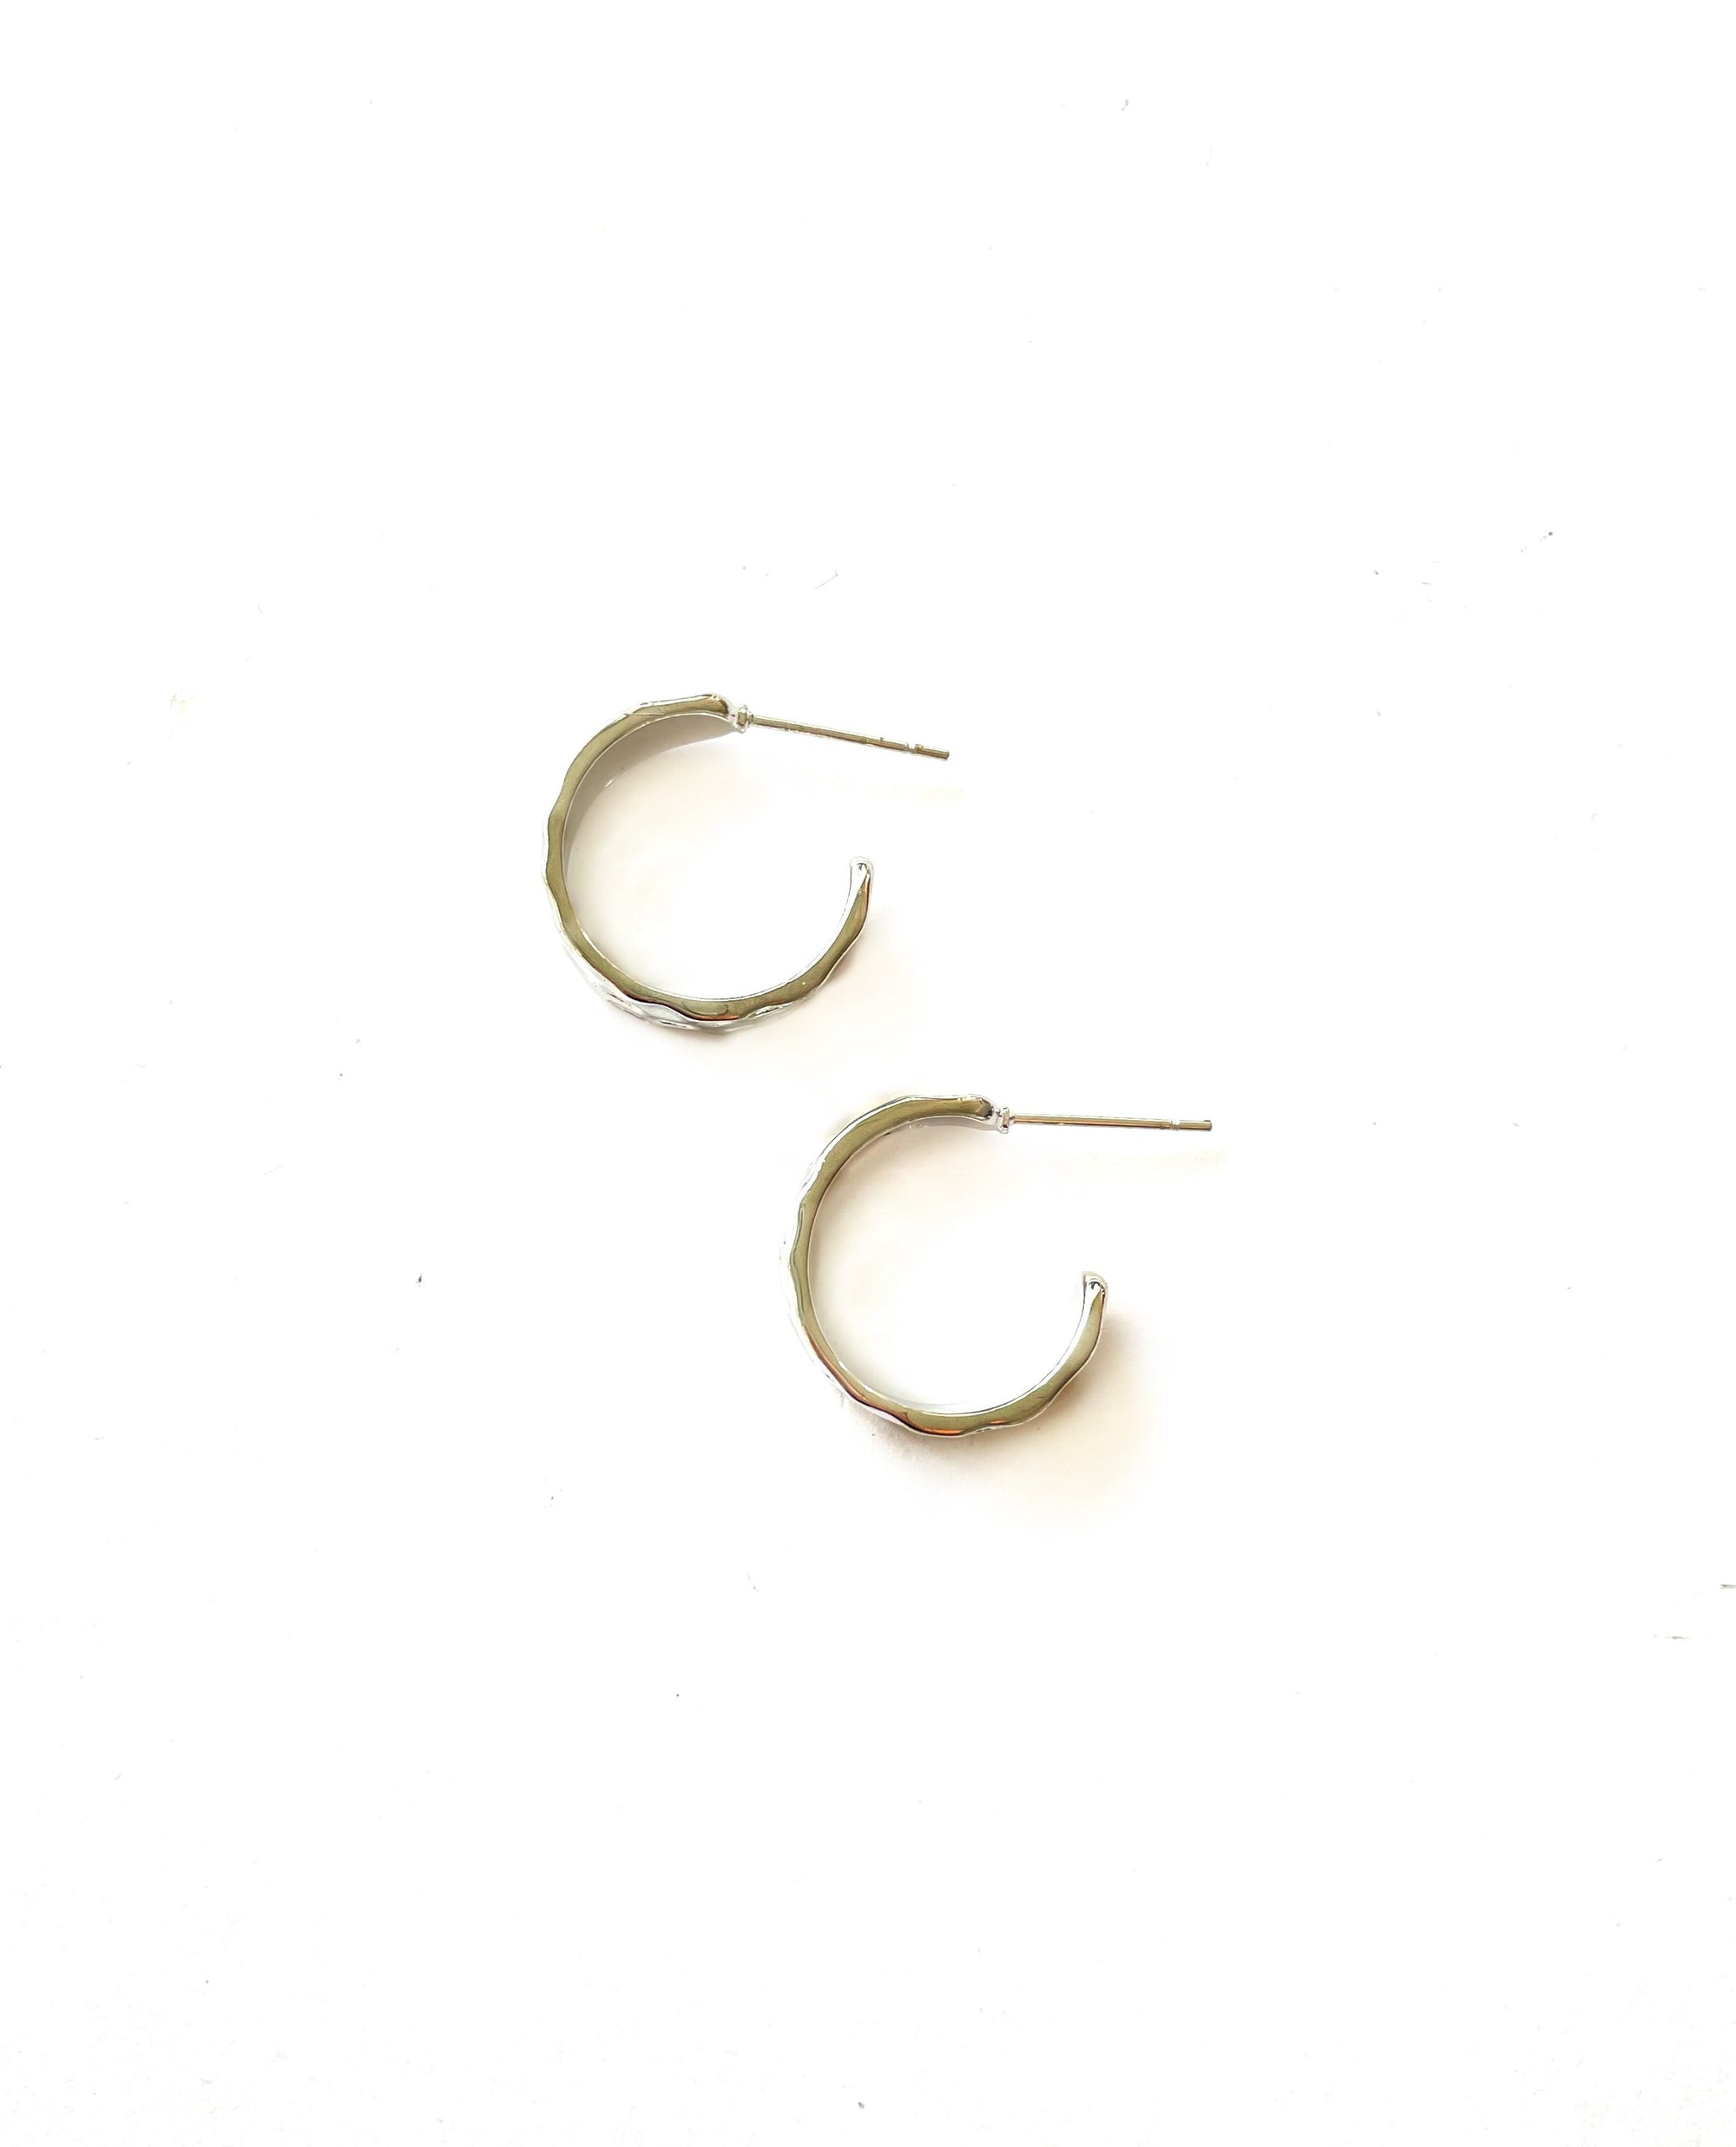 hammered silver hoop earrings with rhodium plating over italian brass